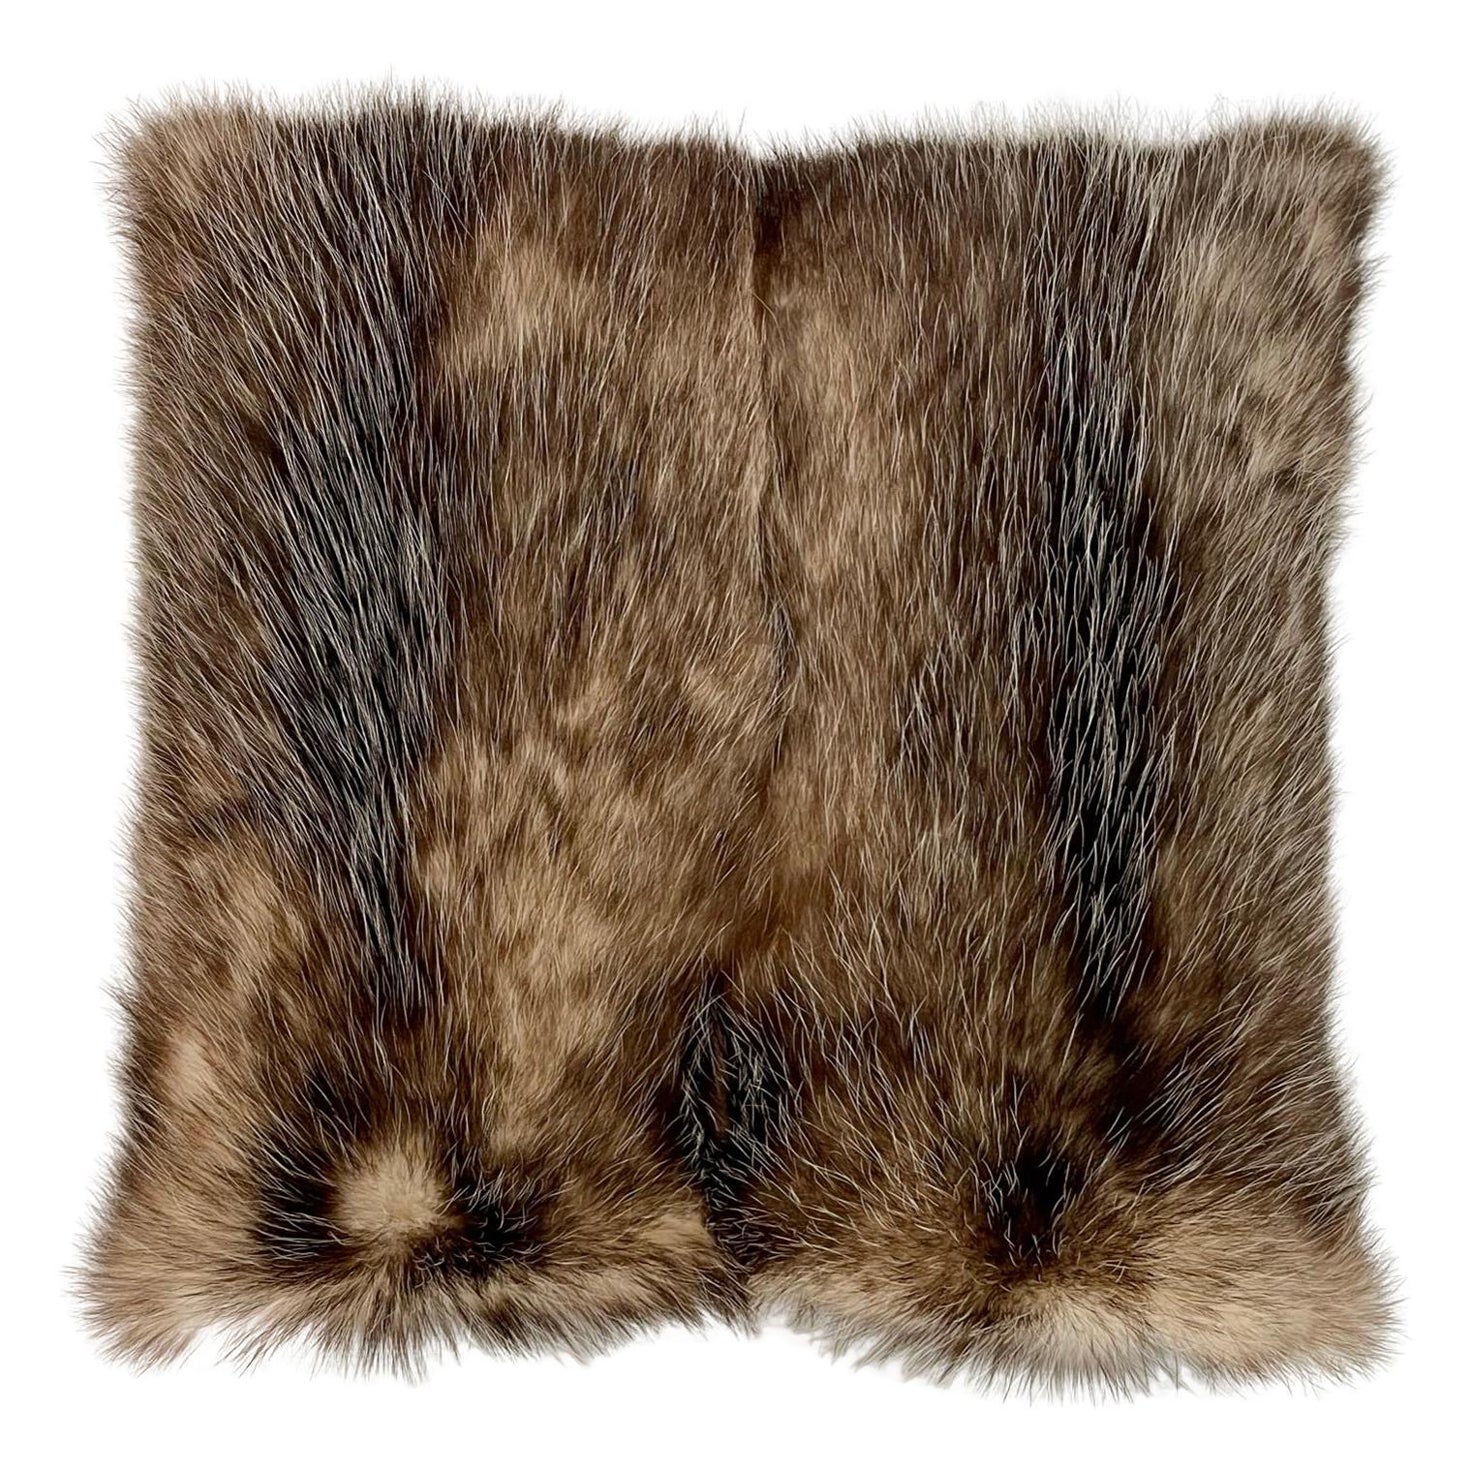 Fur Cushion with Cotton / Down Feather Insert, Opossum